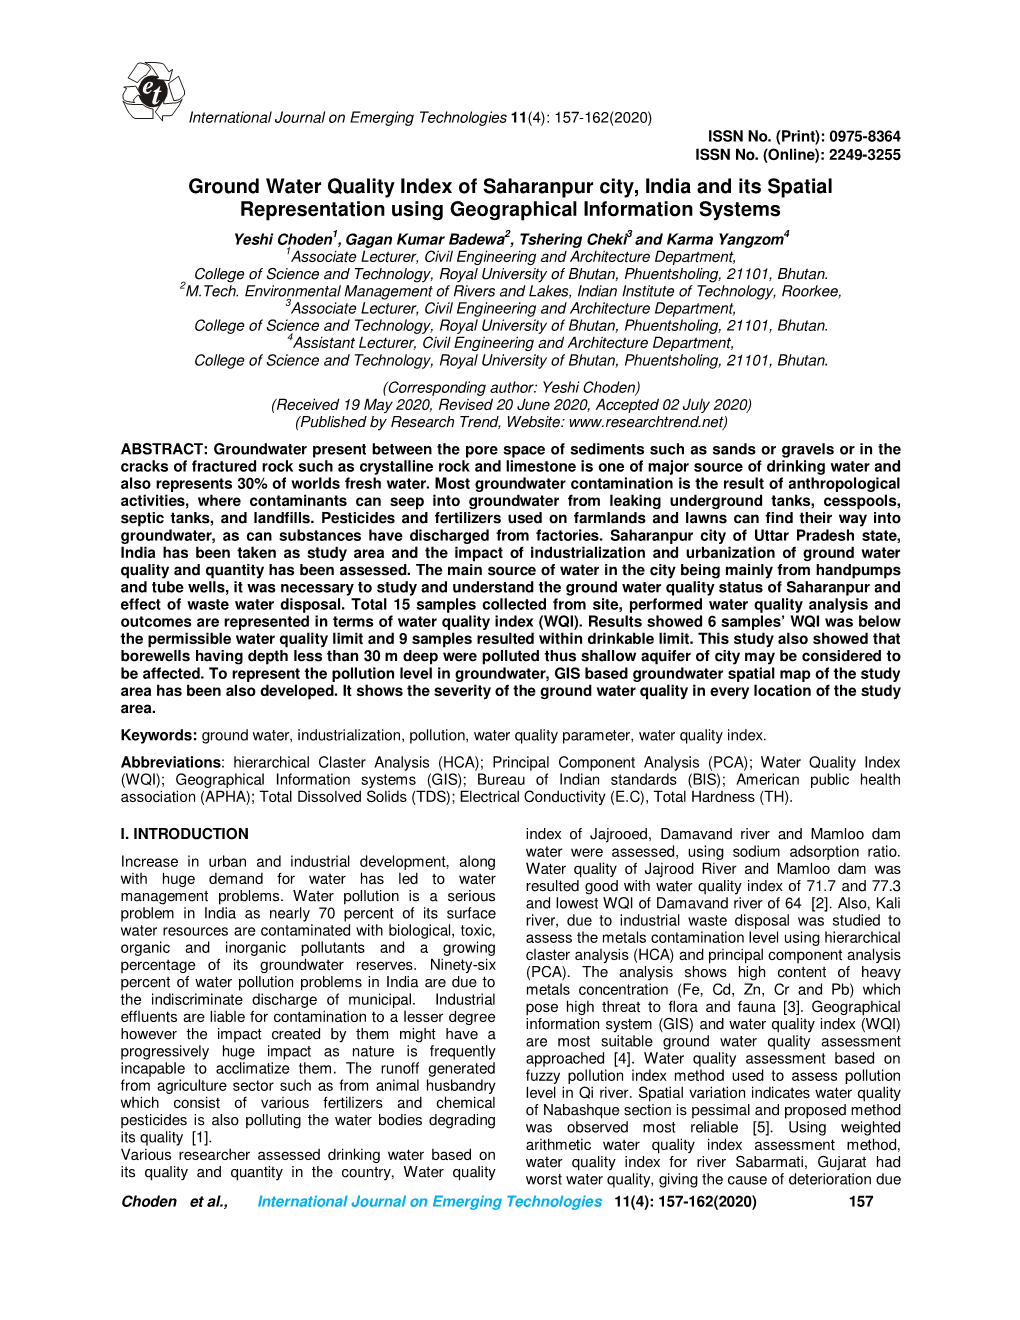 Ground Water Quality Index of Saharanpur City, India and Its